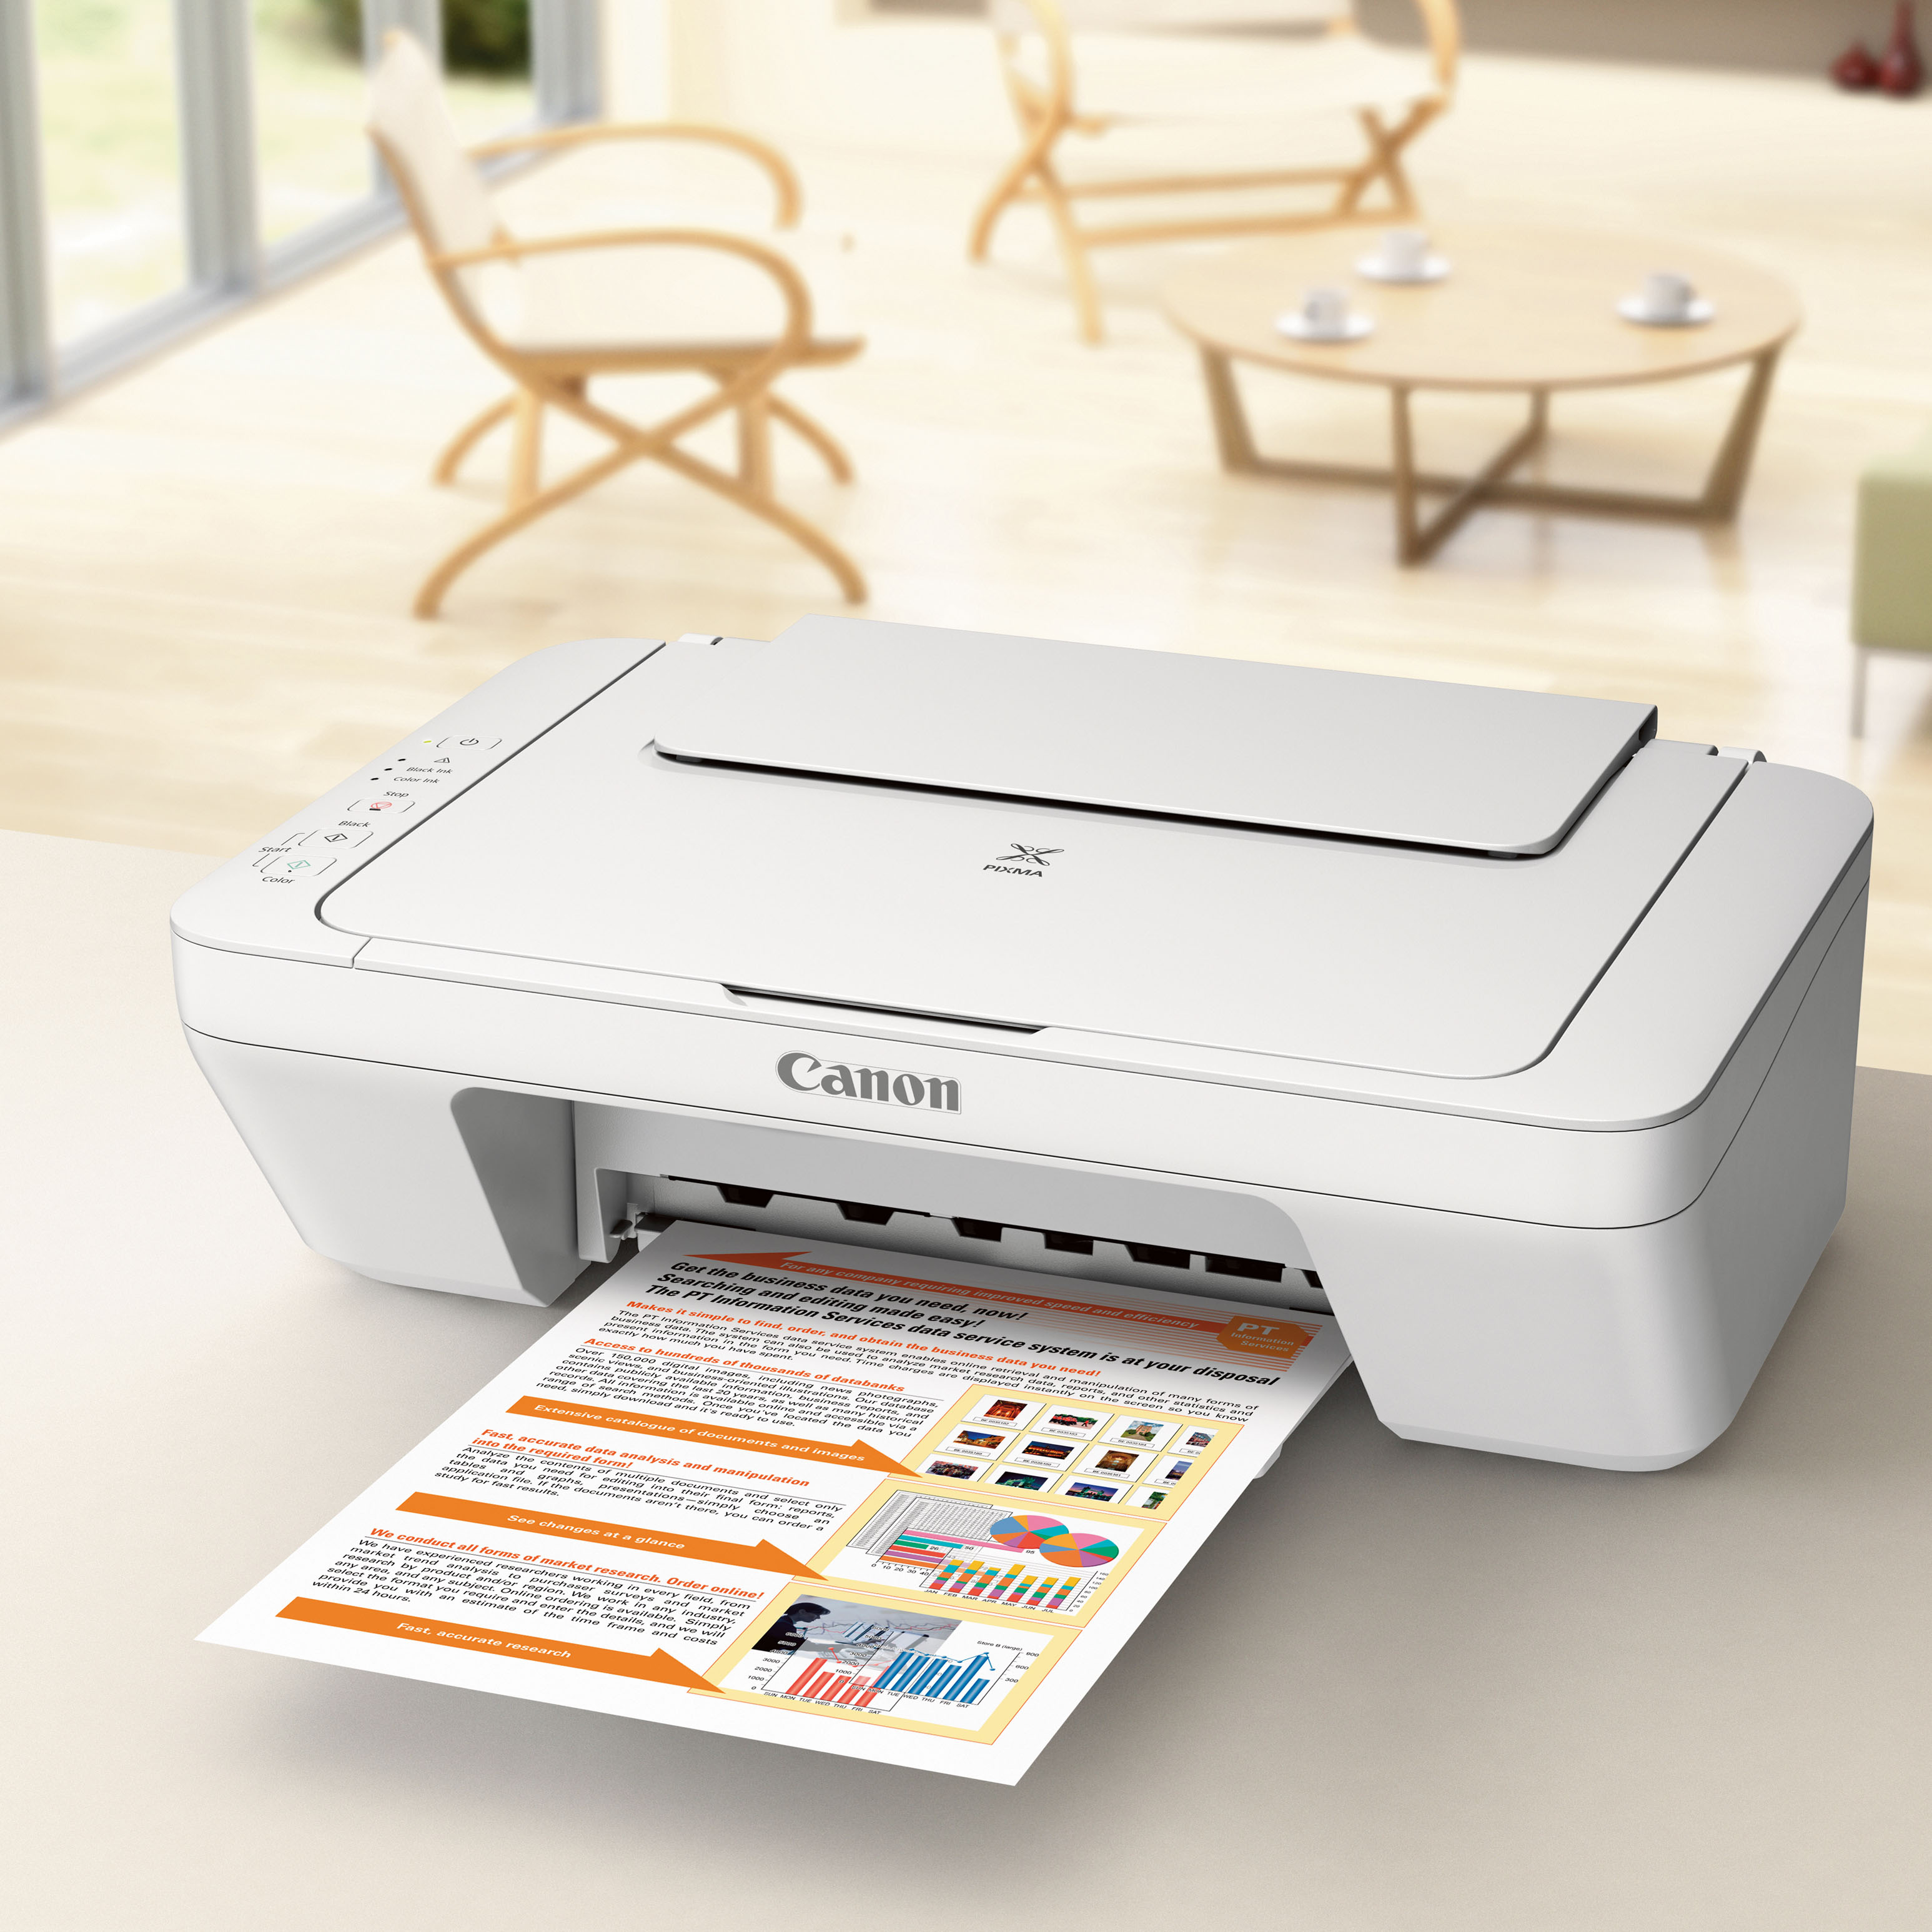 Canon PIXMA MG2522 Wired All-in-One Color Inkjet Printer [USB Cable Included], White - image 6 of 6